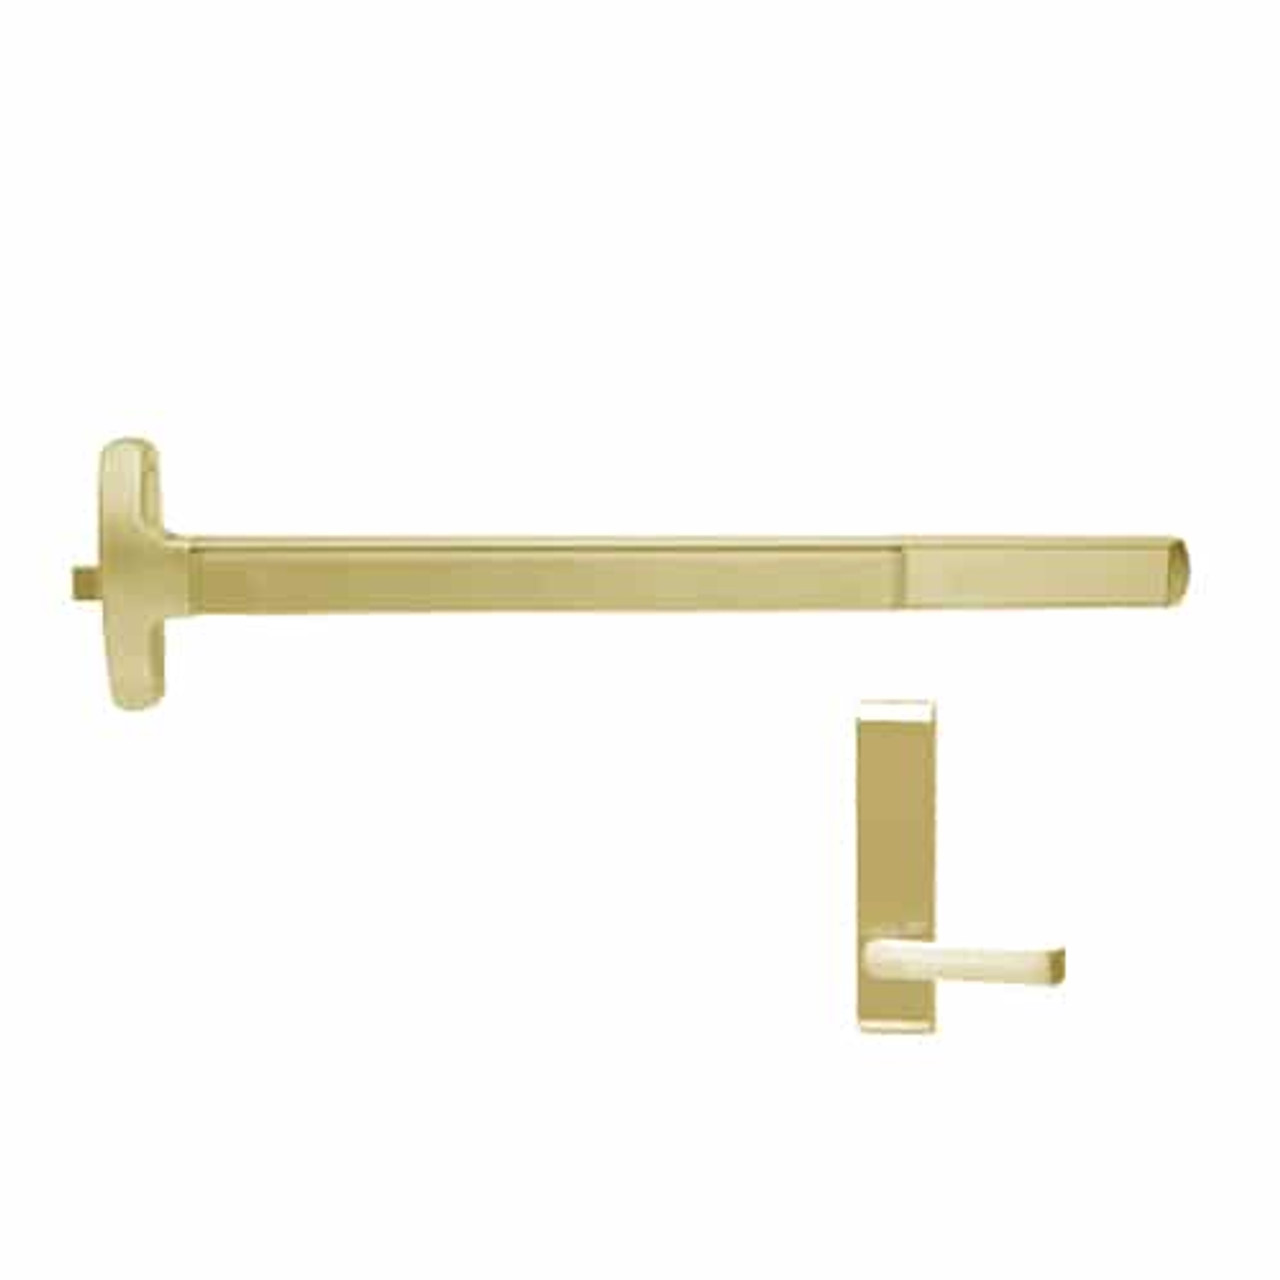 F-24-R-L-BE-DANE-US4-4-LHR Falcon Exit Device in Satin Brass